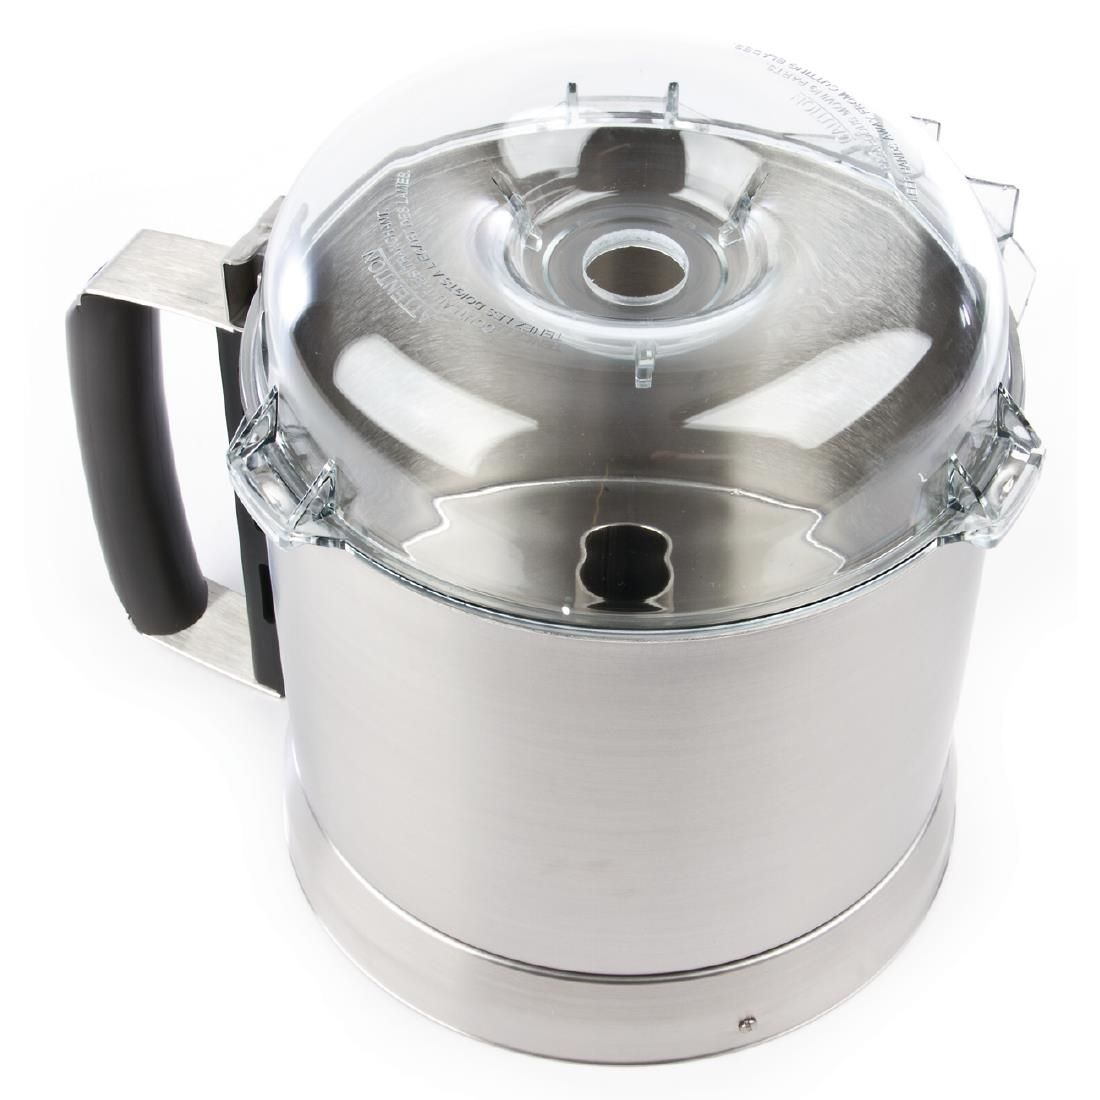 K316 Robot Coupe Mixing Bowl With Lid - Ref 29149 JD Catering Equipment Solutions Ltd